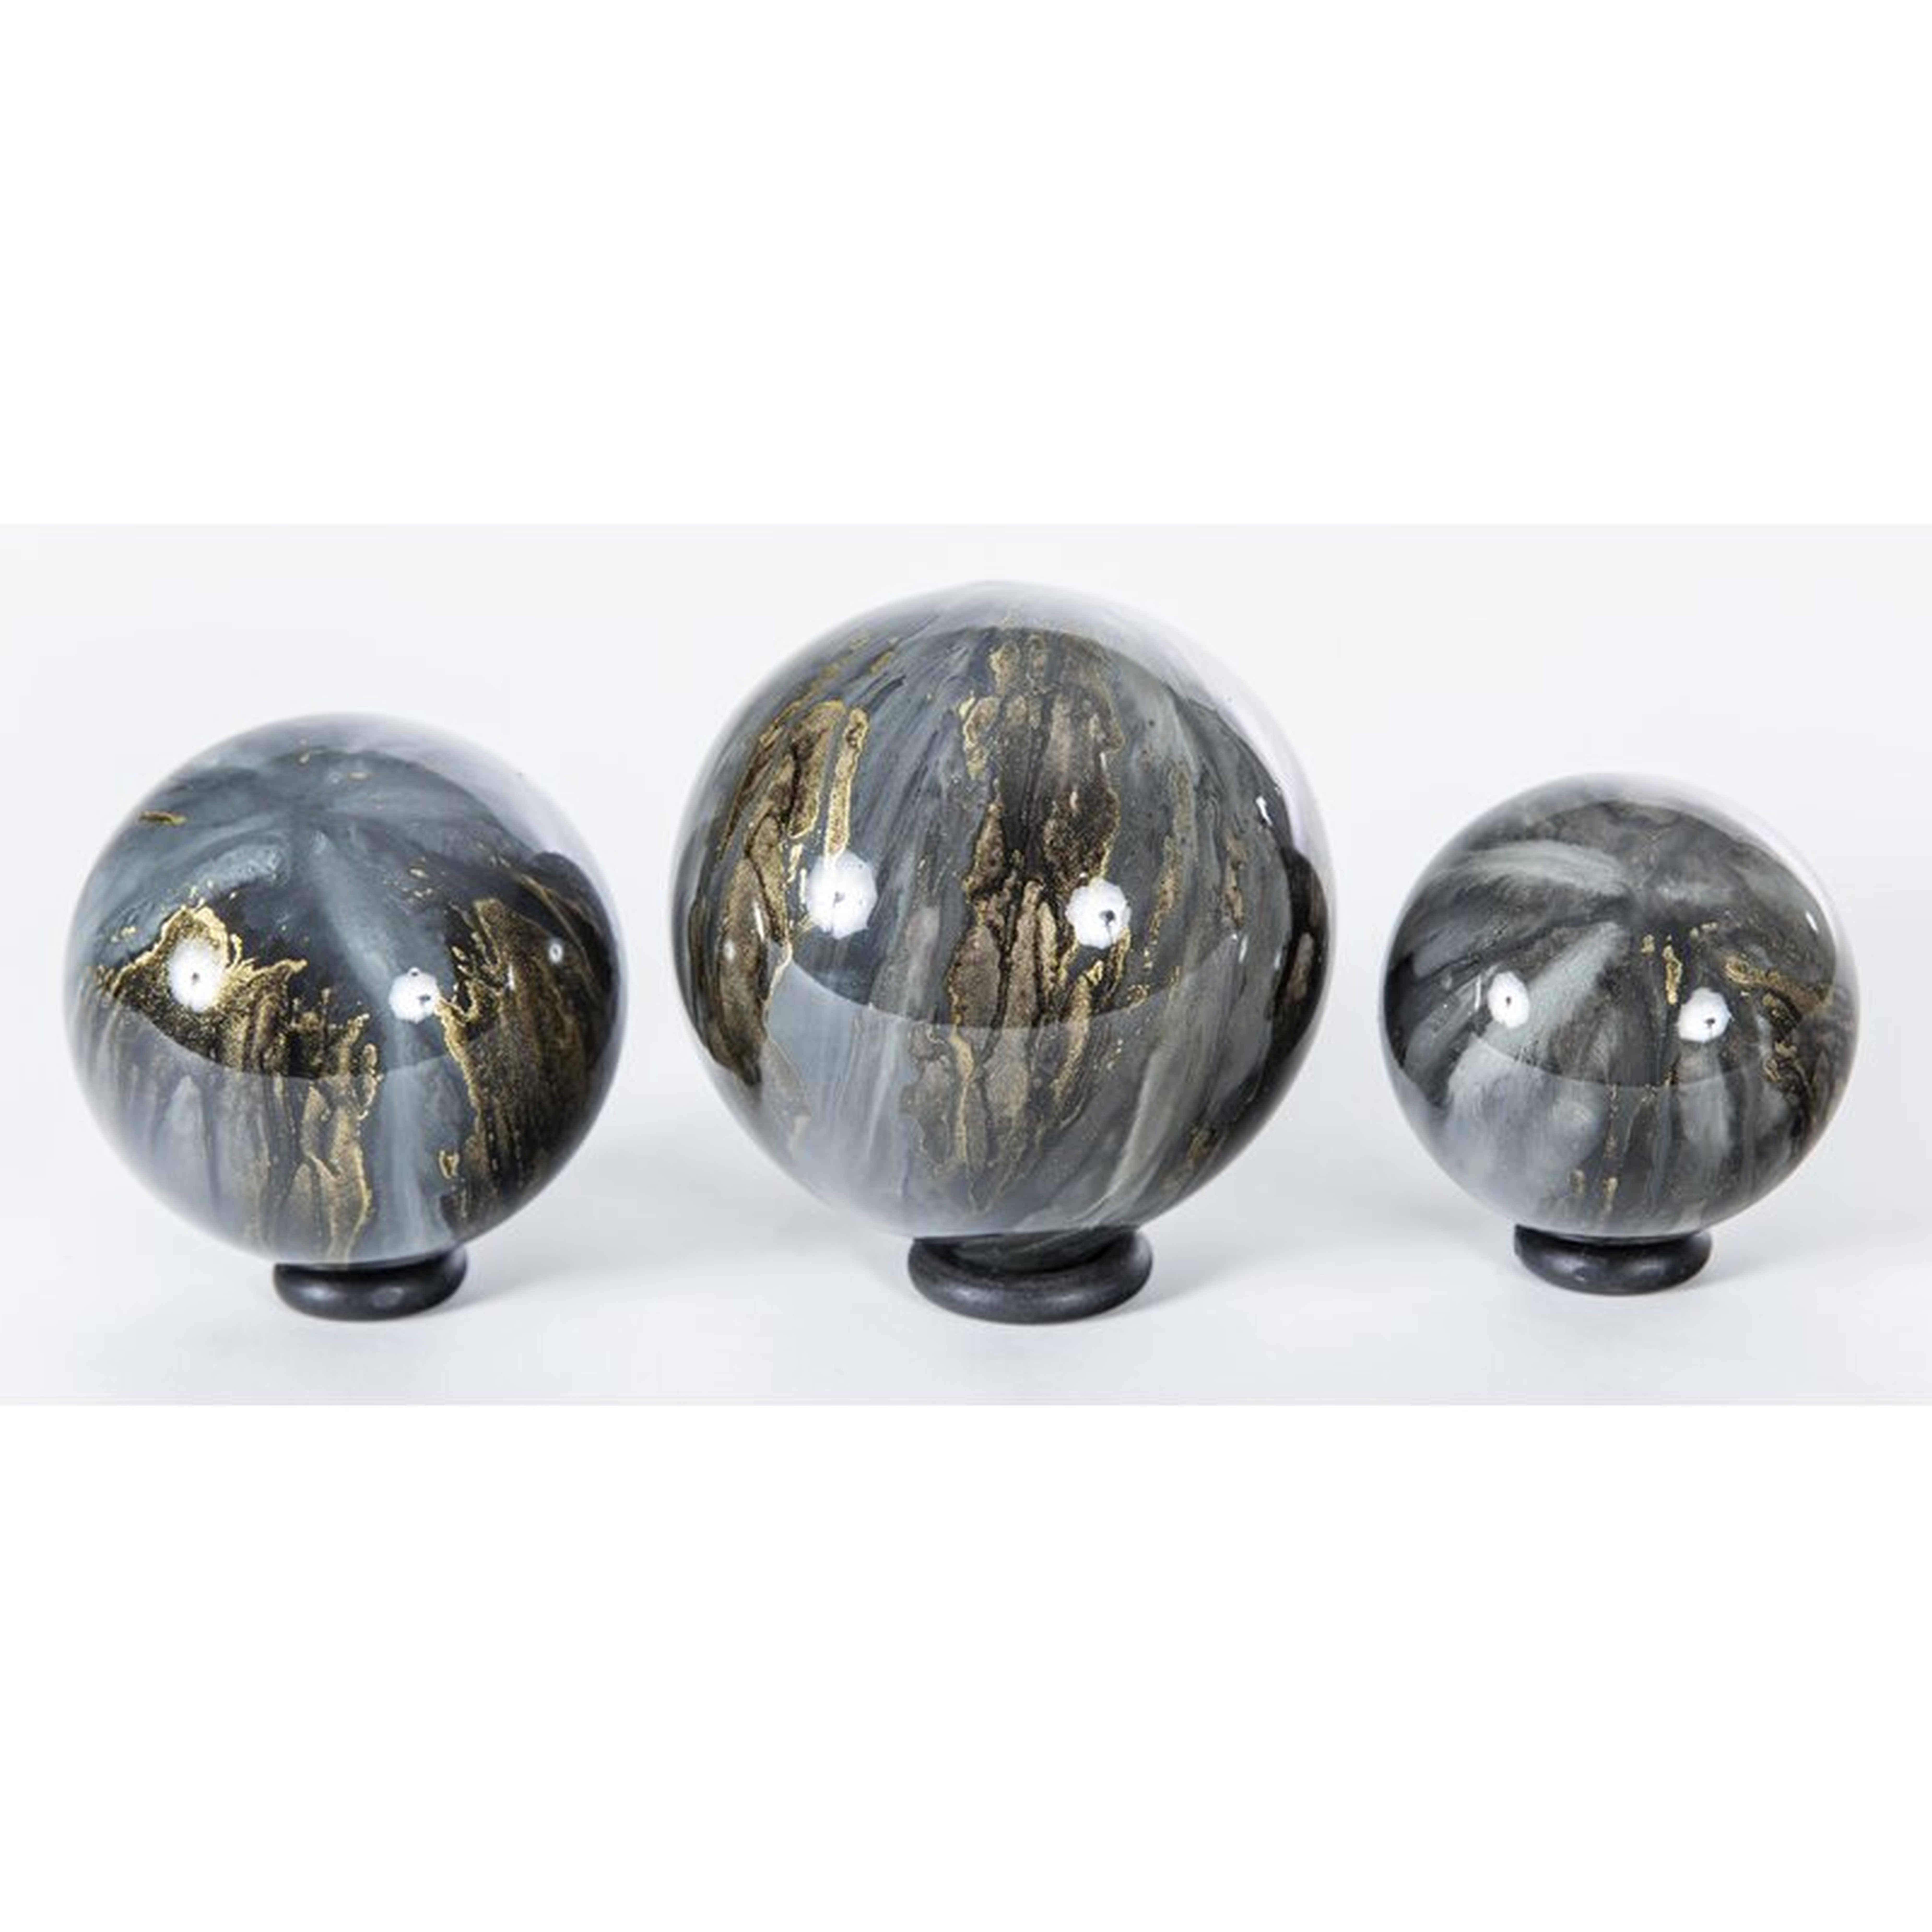 Prima Design Source 3 Piece Cathedral Stone Hand Blown Glass Display Spheres on Iron Ring Stands Sculpture Set - Perigold